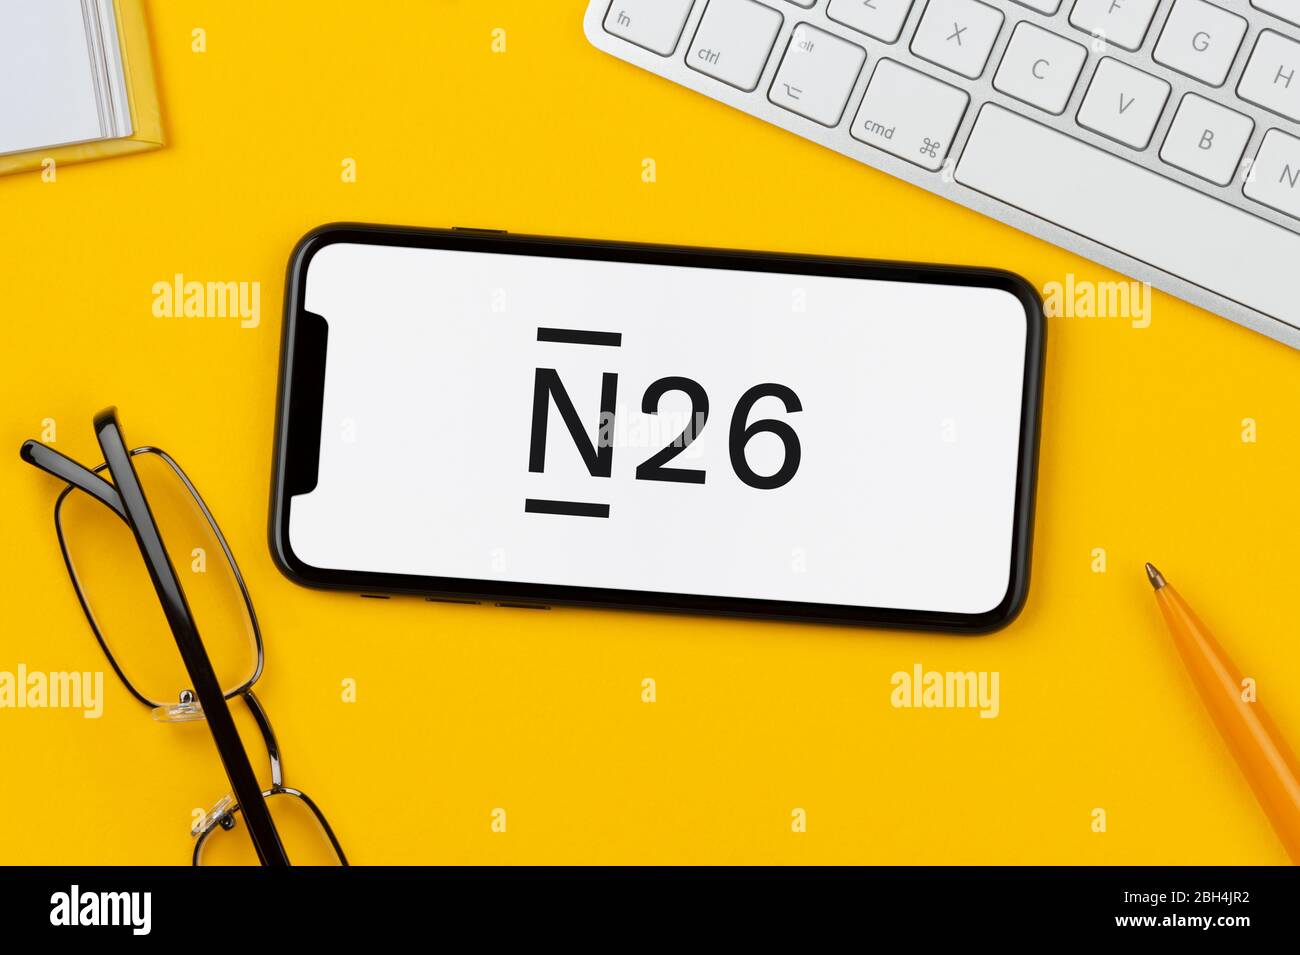 A smartphone showing the N26 logo rests on a yellow background along with a keyboard, glasses, pen and book (Editorial use only). Stock Photo